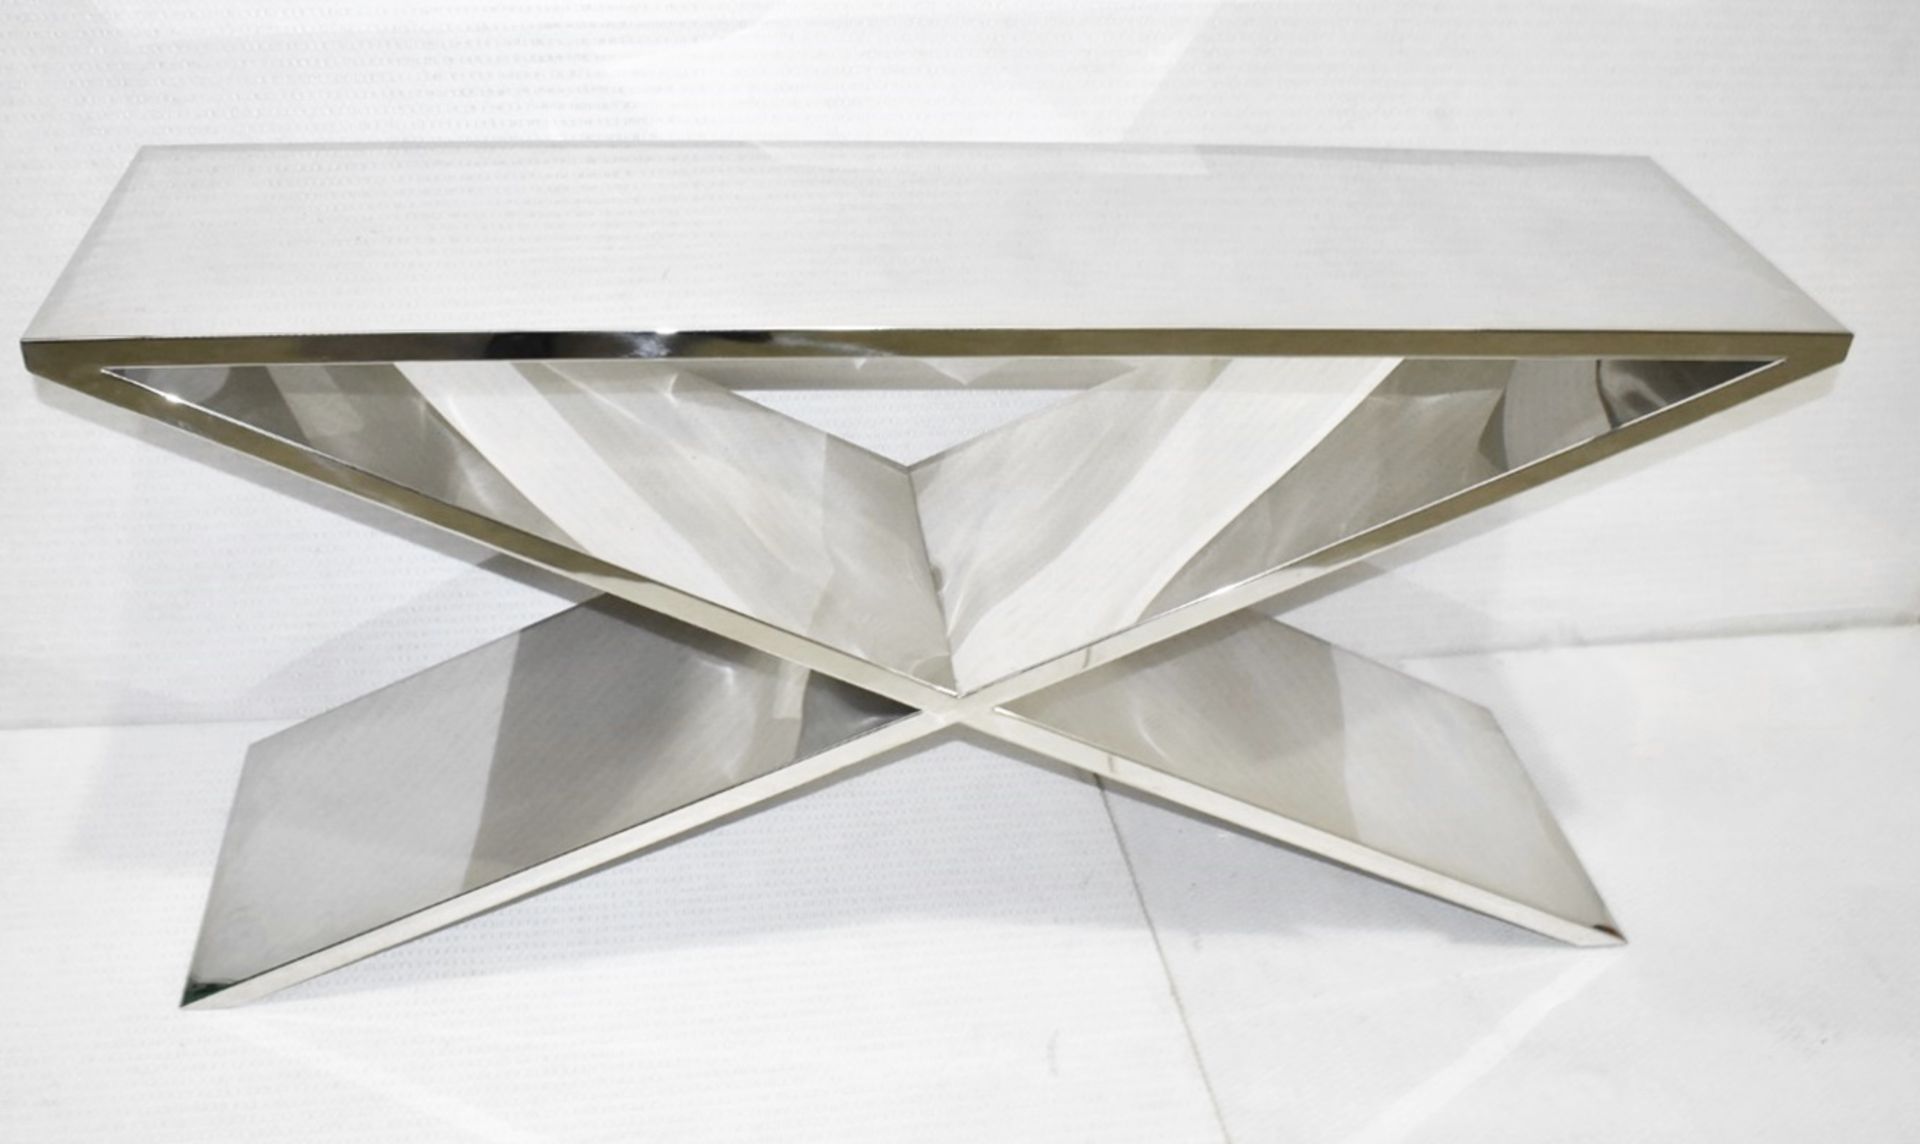 1 x EICHHOLTZ 'Metropole' Luxury Handcrafted Mirrored Console Table - Original Price £2,810 - Image 4 of 10